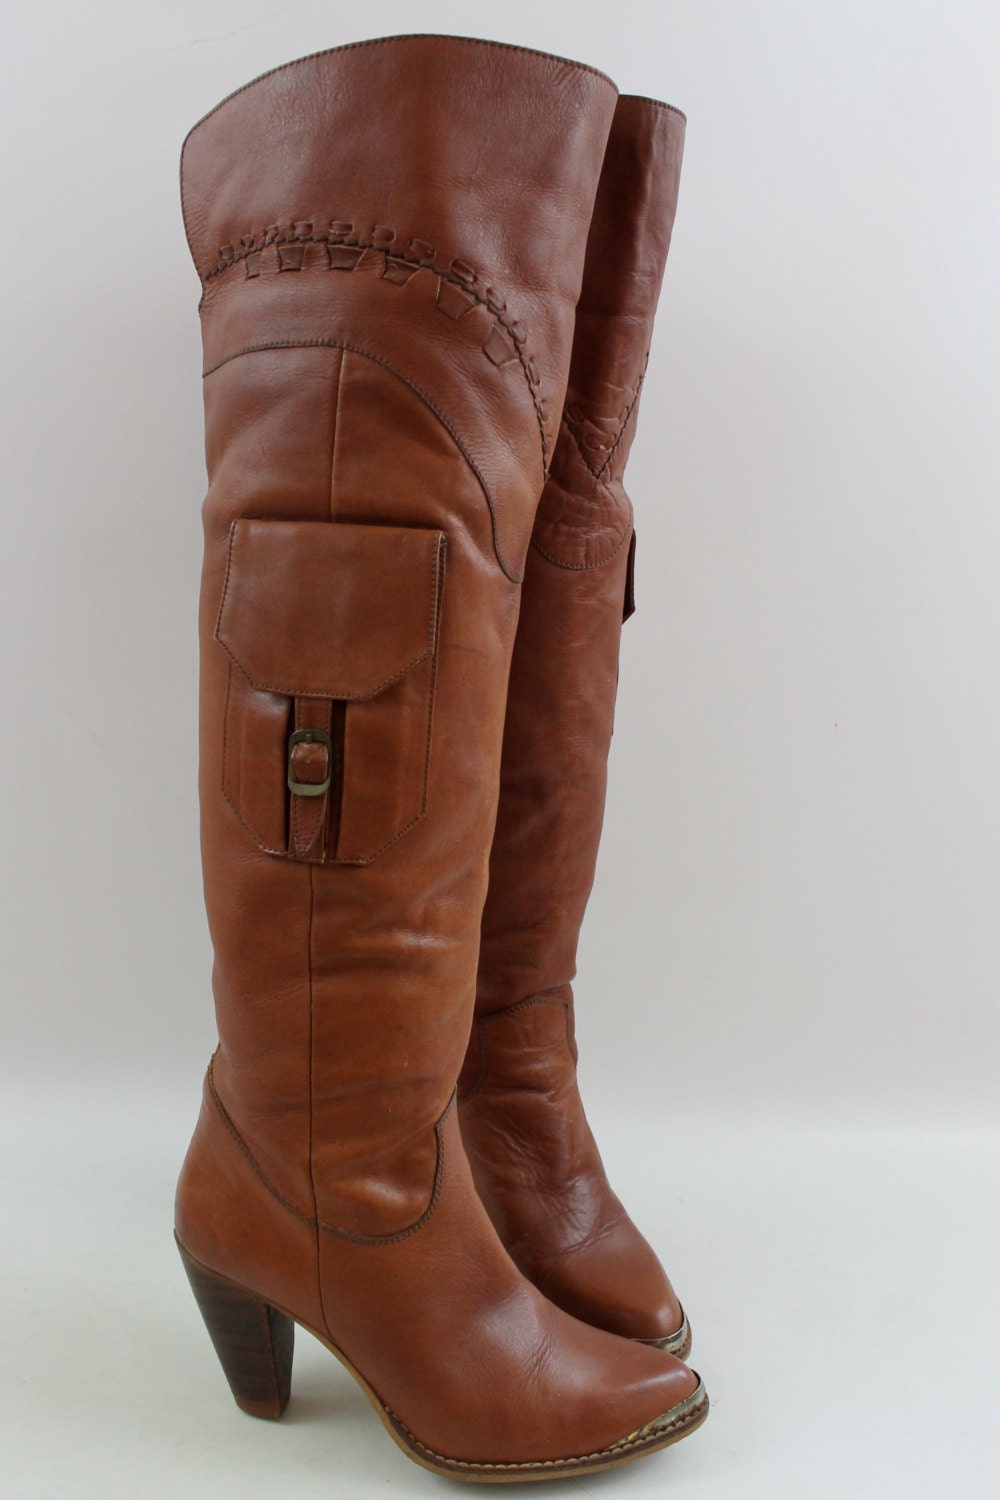 Vintage 70s Brown Leather OTK POCKET Thigh High Boots 7.5